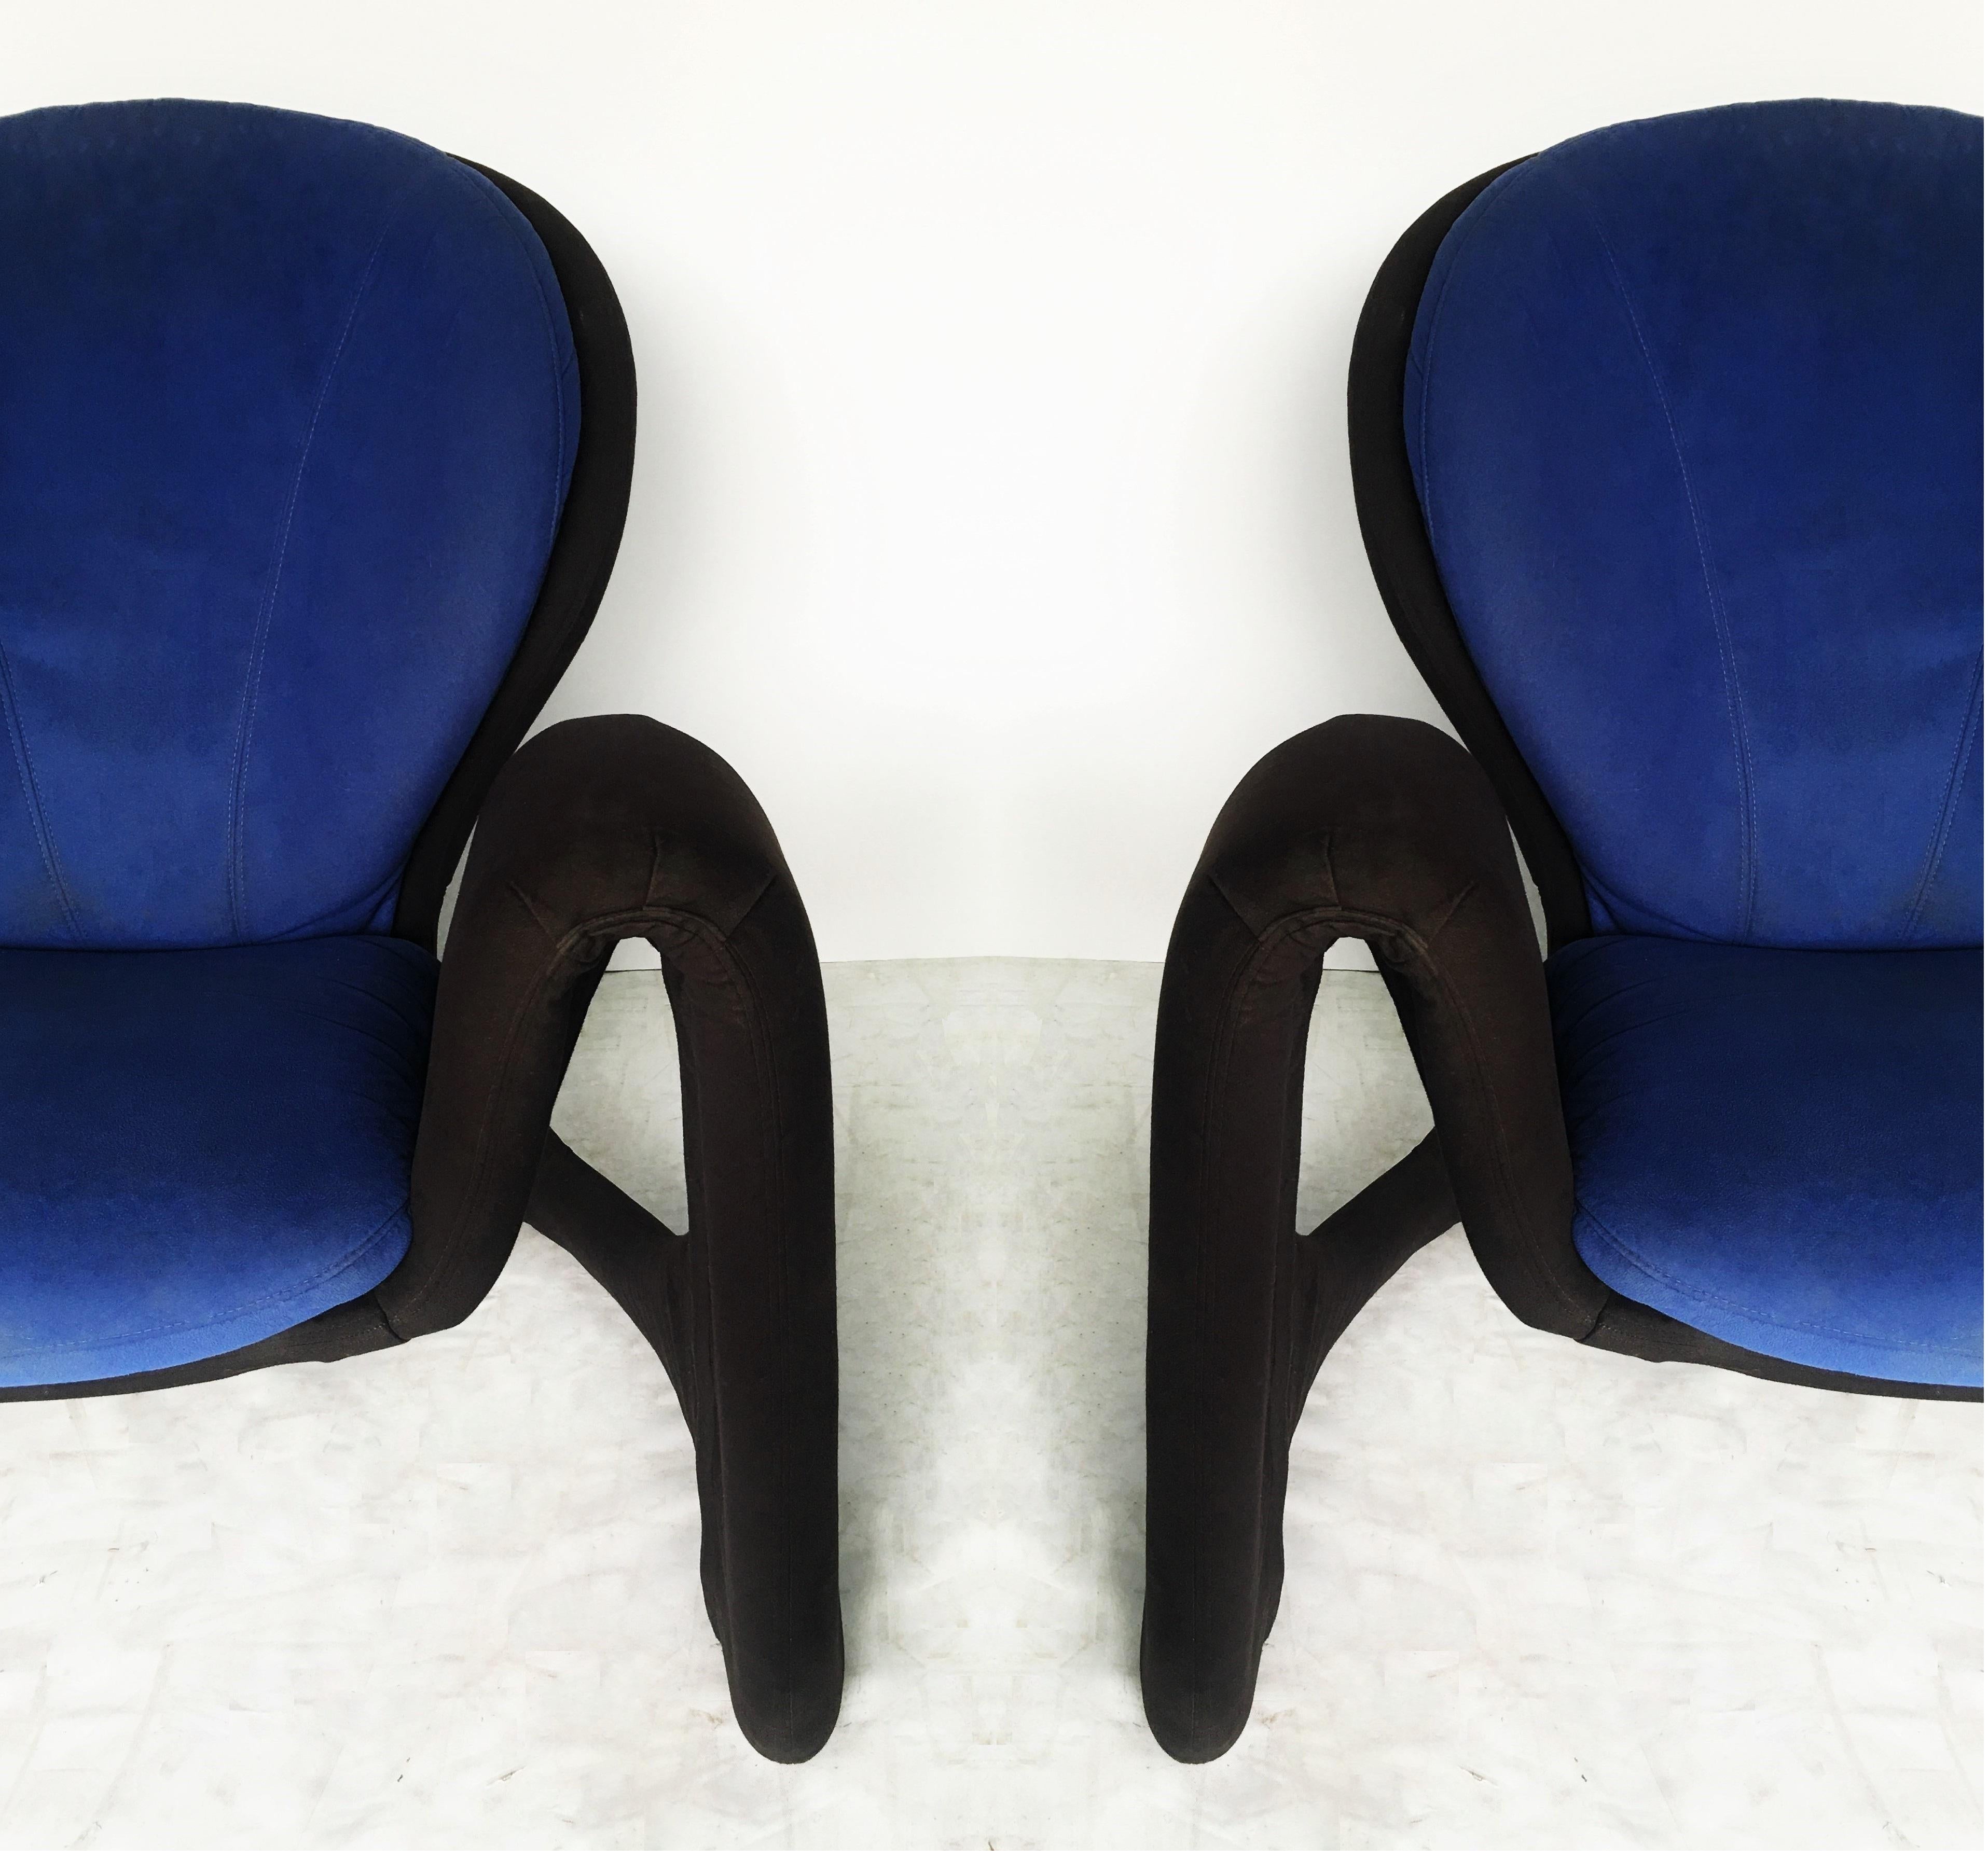 Simple yet stunning design, circa late 1980s-early 1990s lounge chair, unmarked but very much in the style of Jaymar Pierre Paulin Louis Durot. Professionally upholstered in black and blue. These make a gorgeous statement with their sculptural